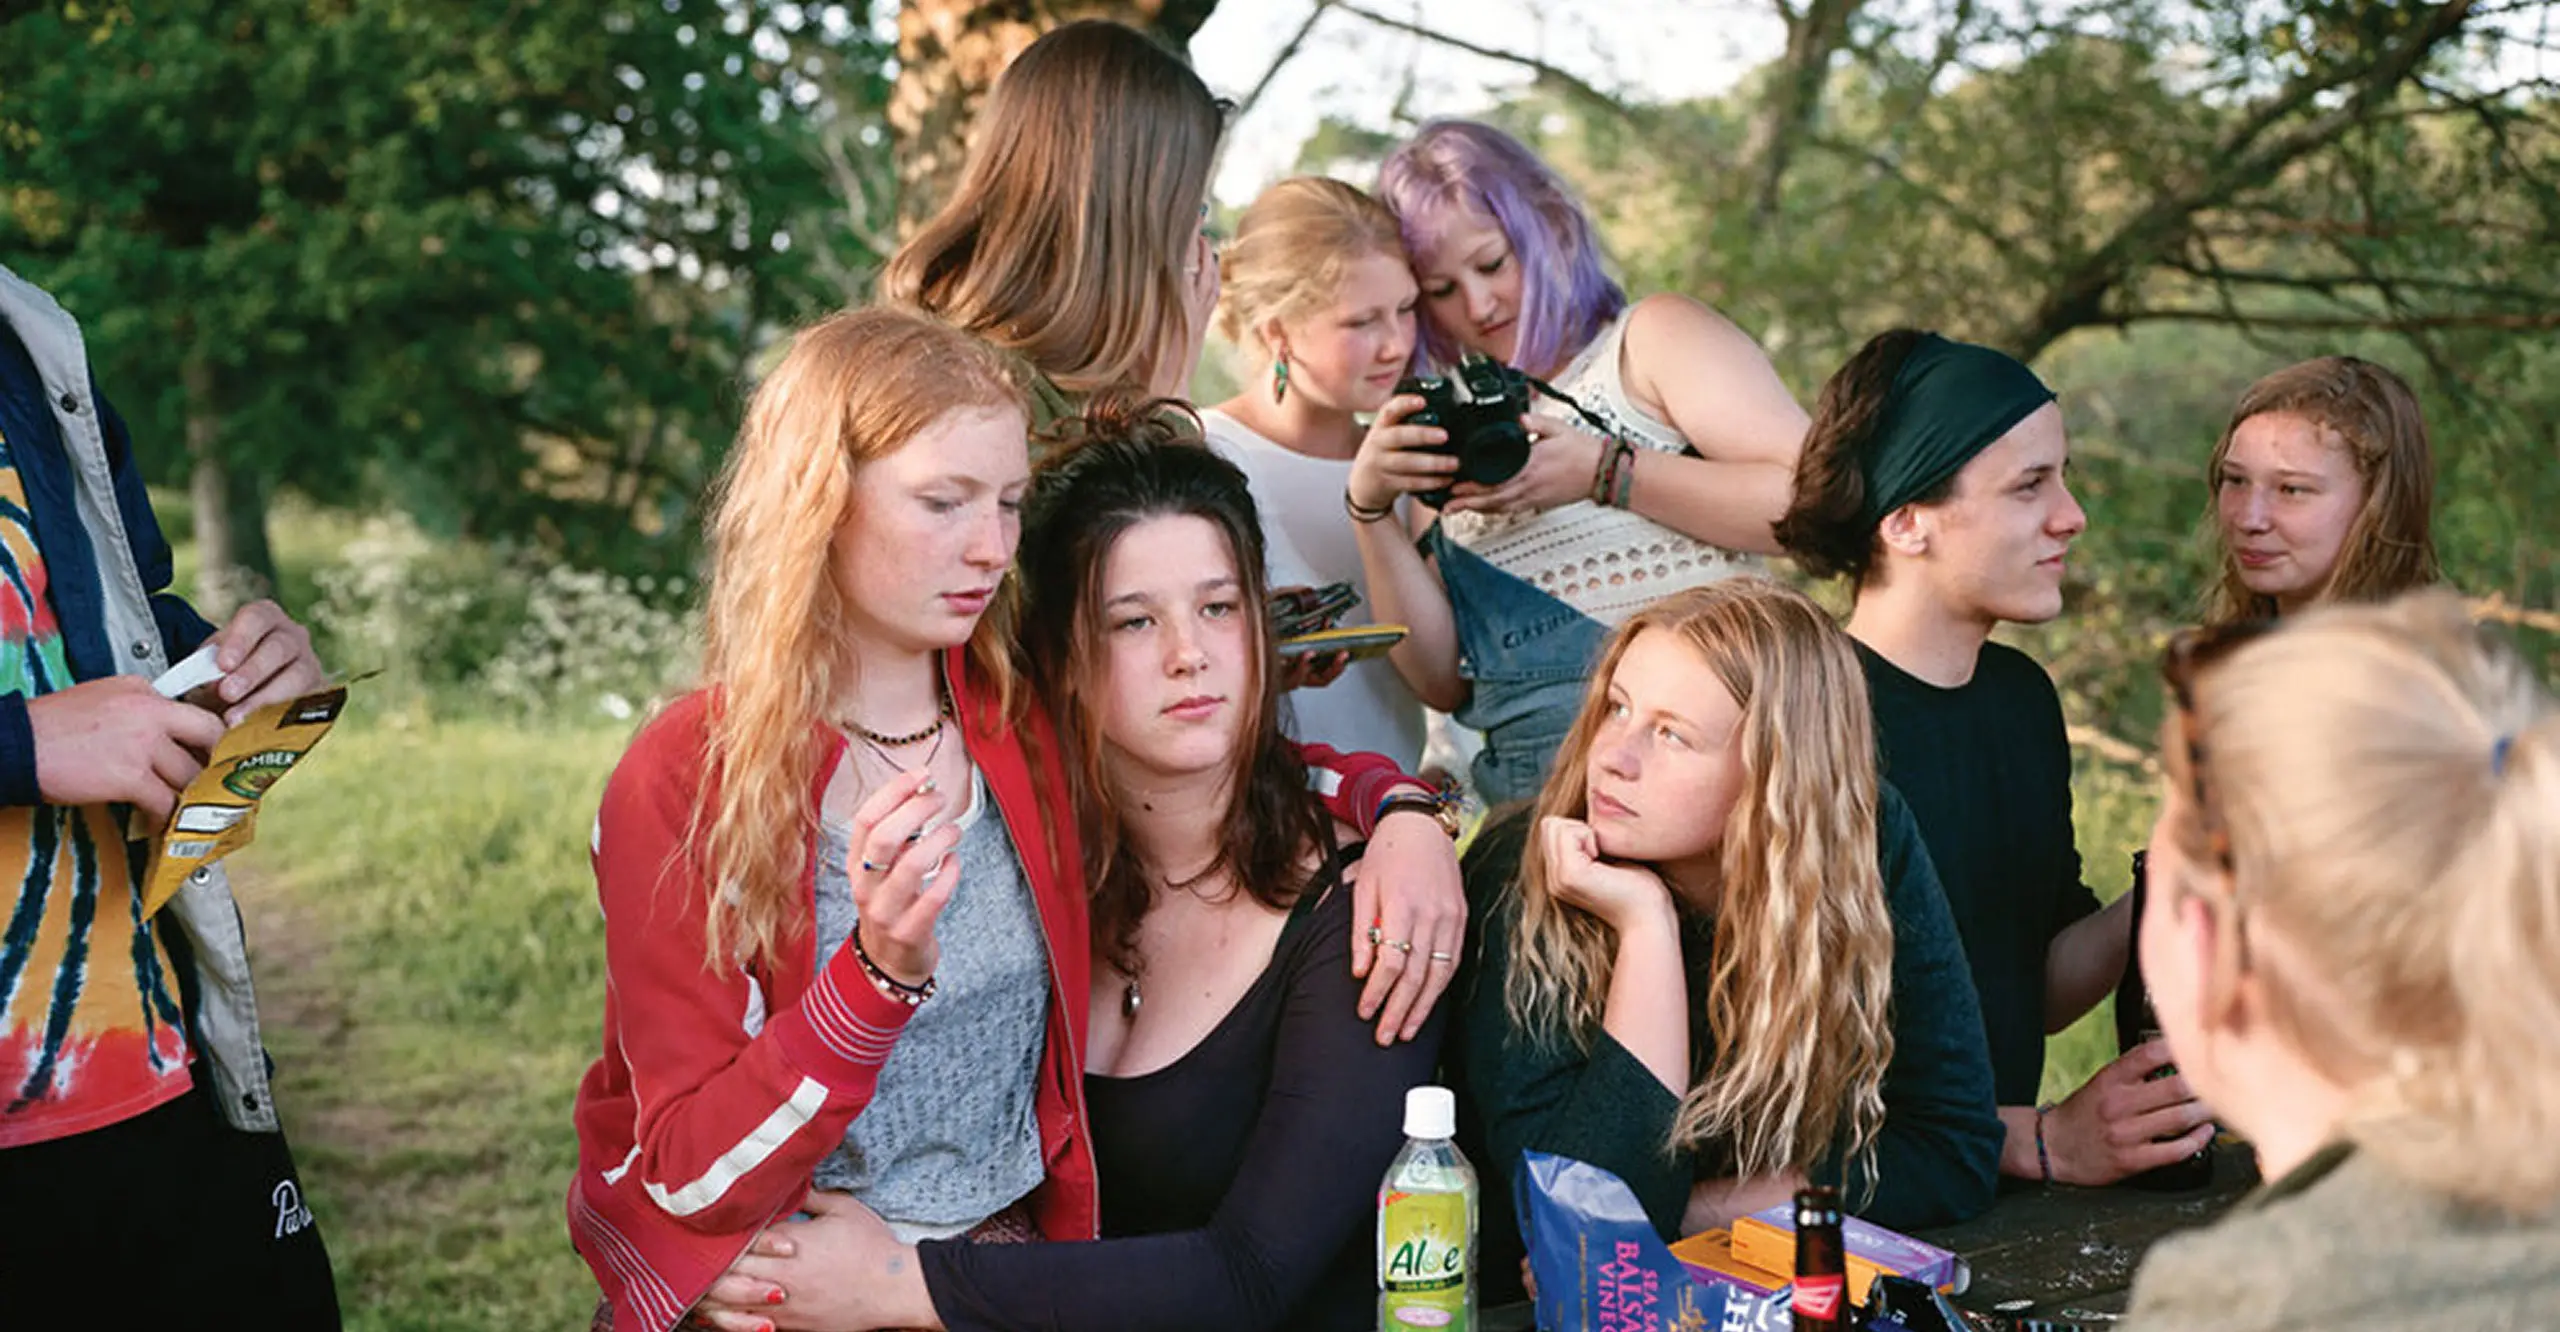 A photograph of a group of teenagers outside under a tree.